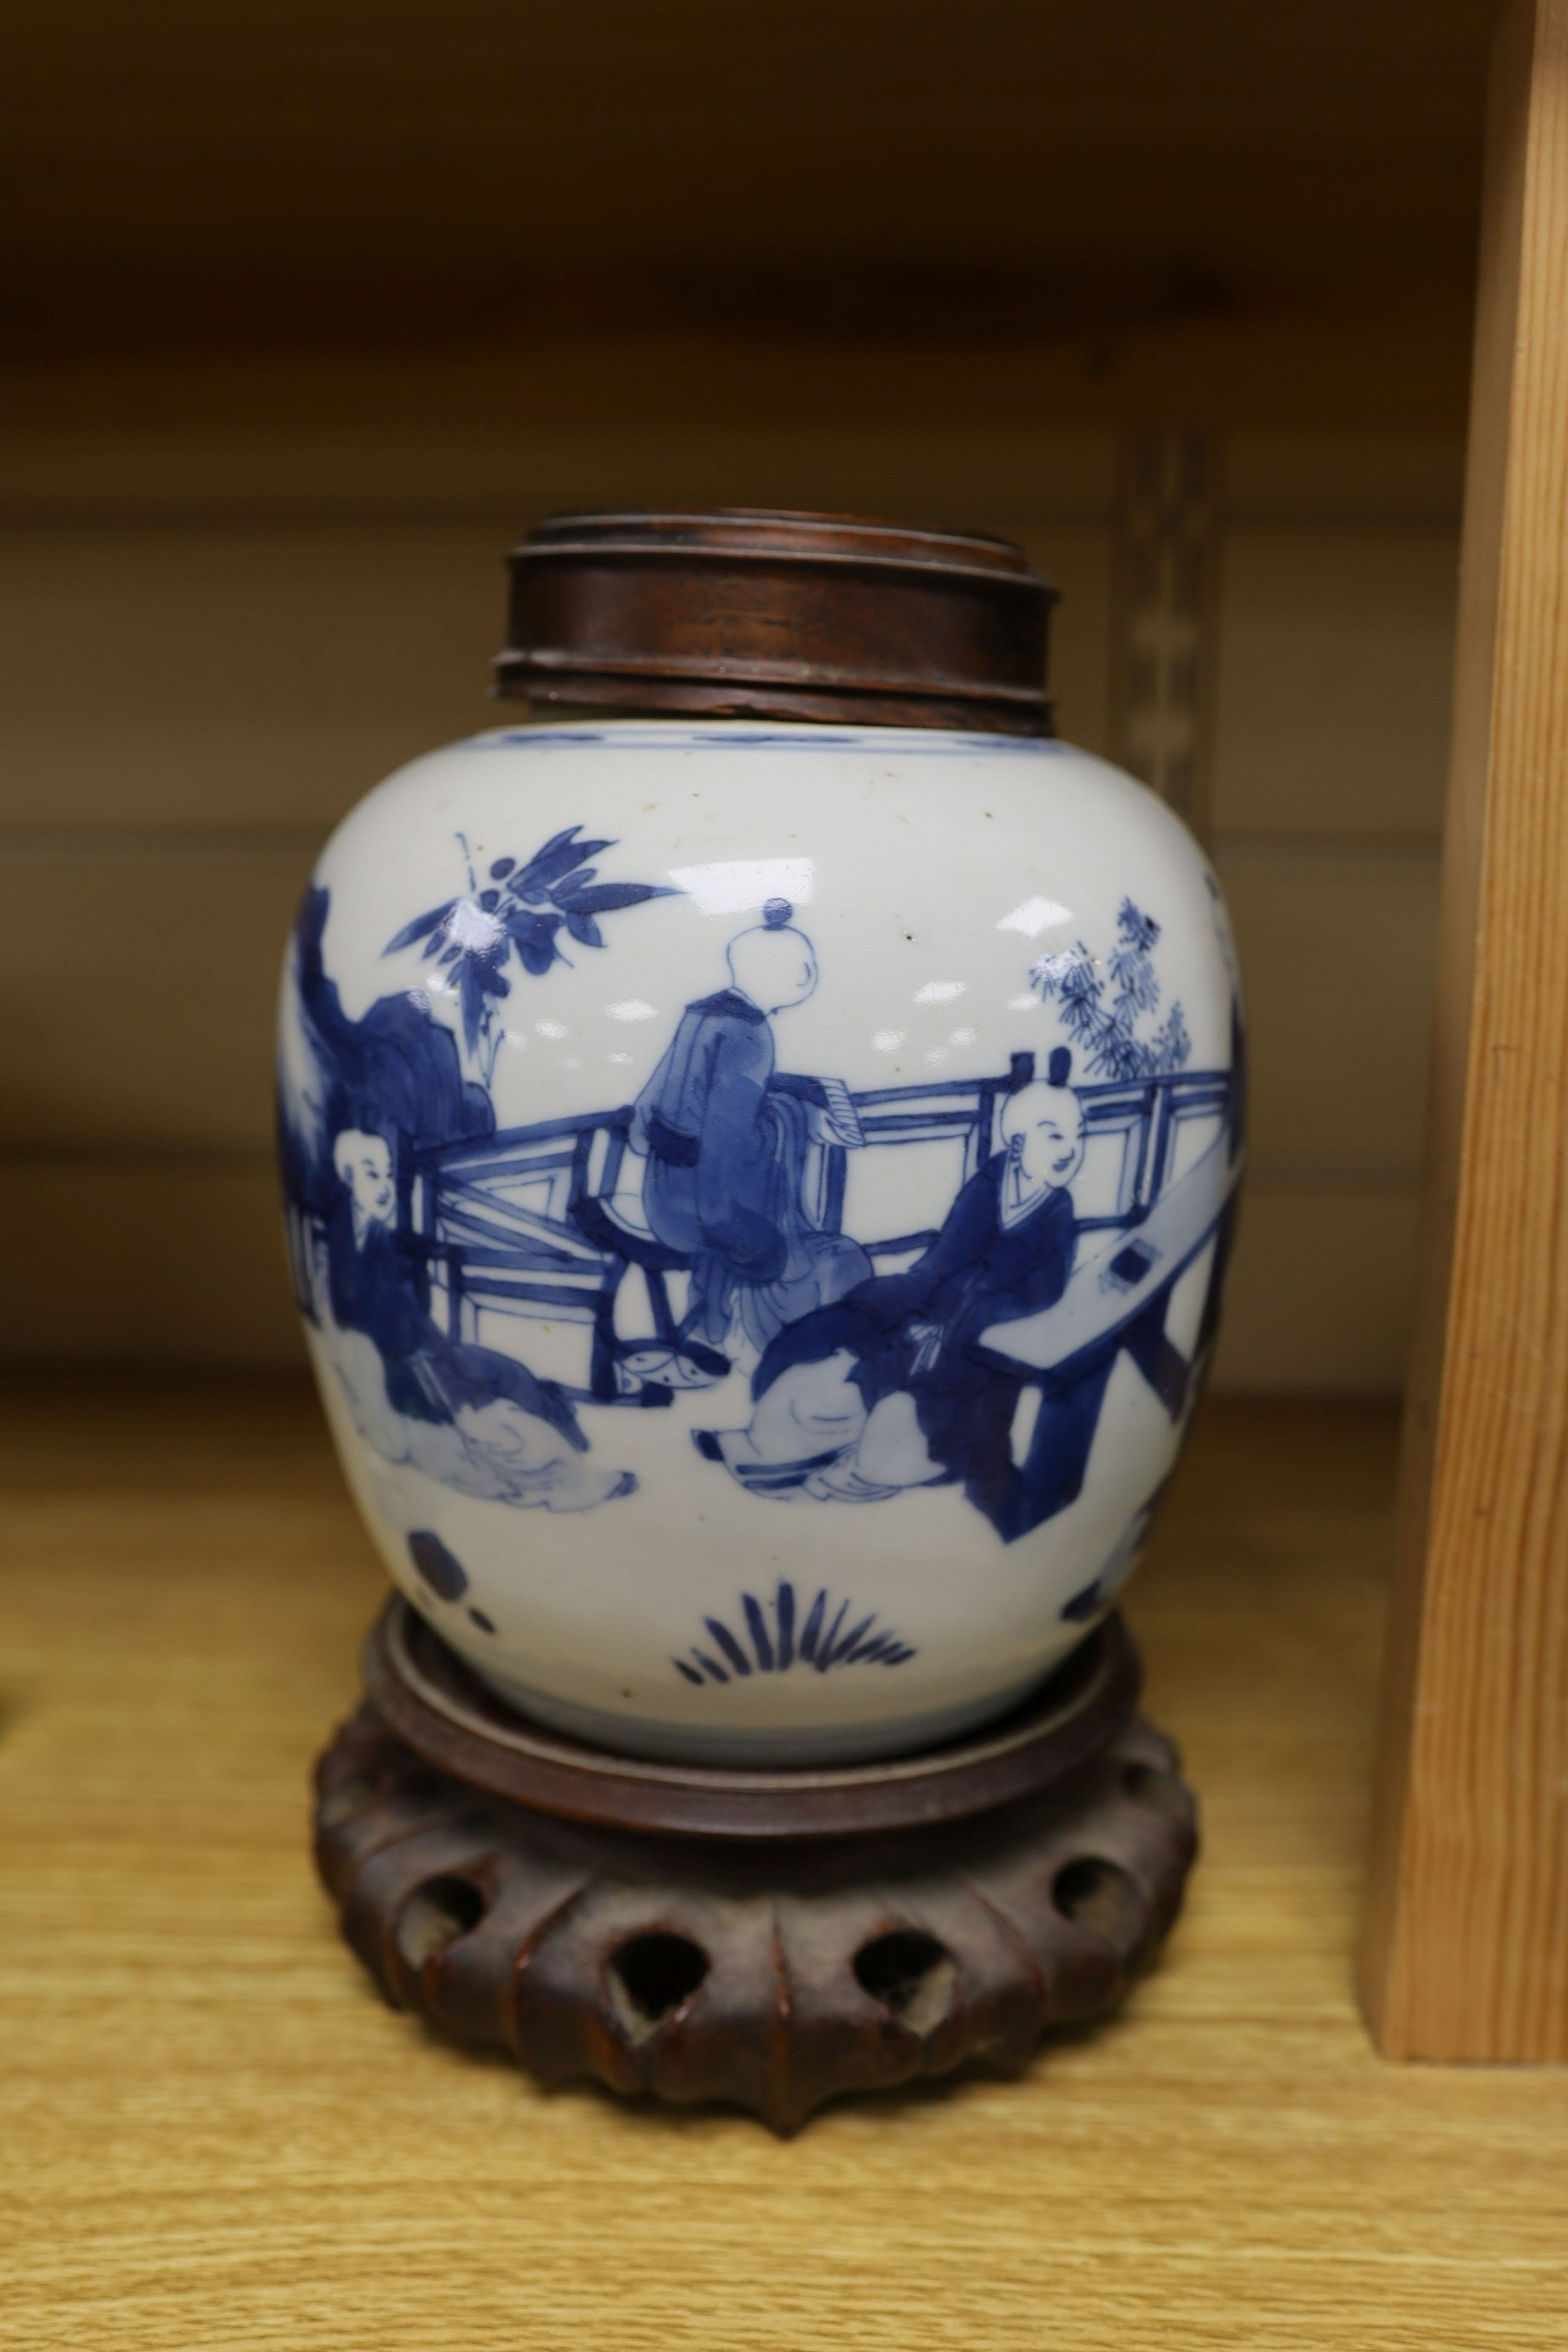 A Chinese blue and white 'boys' jar, 19th century, wood cover and stand, total height 24cm high